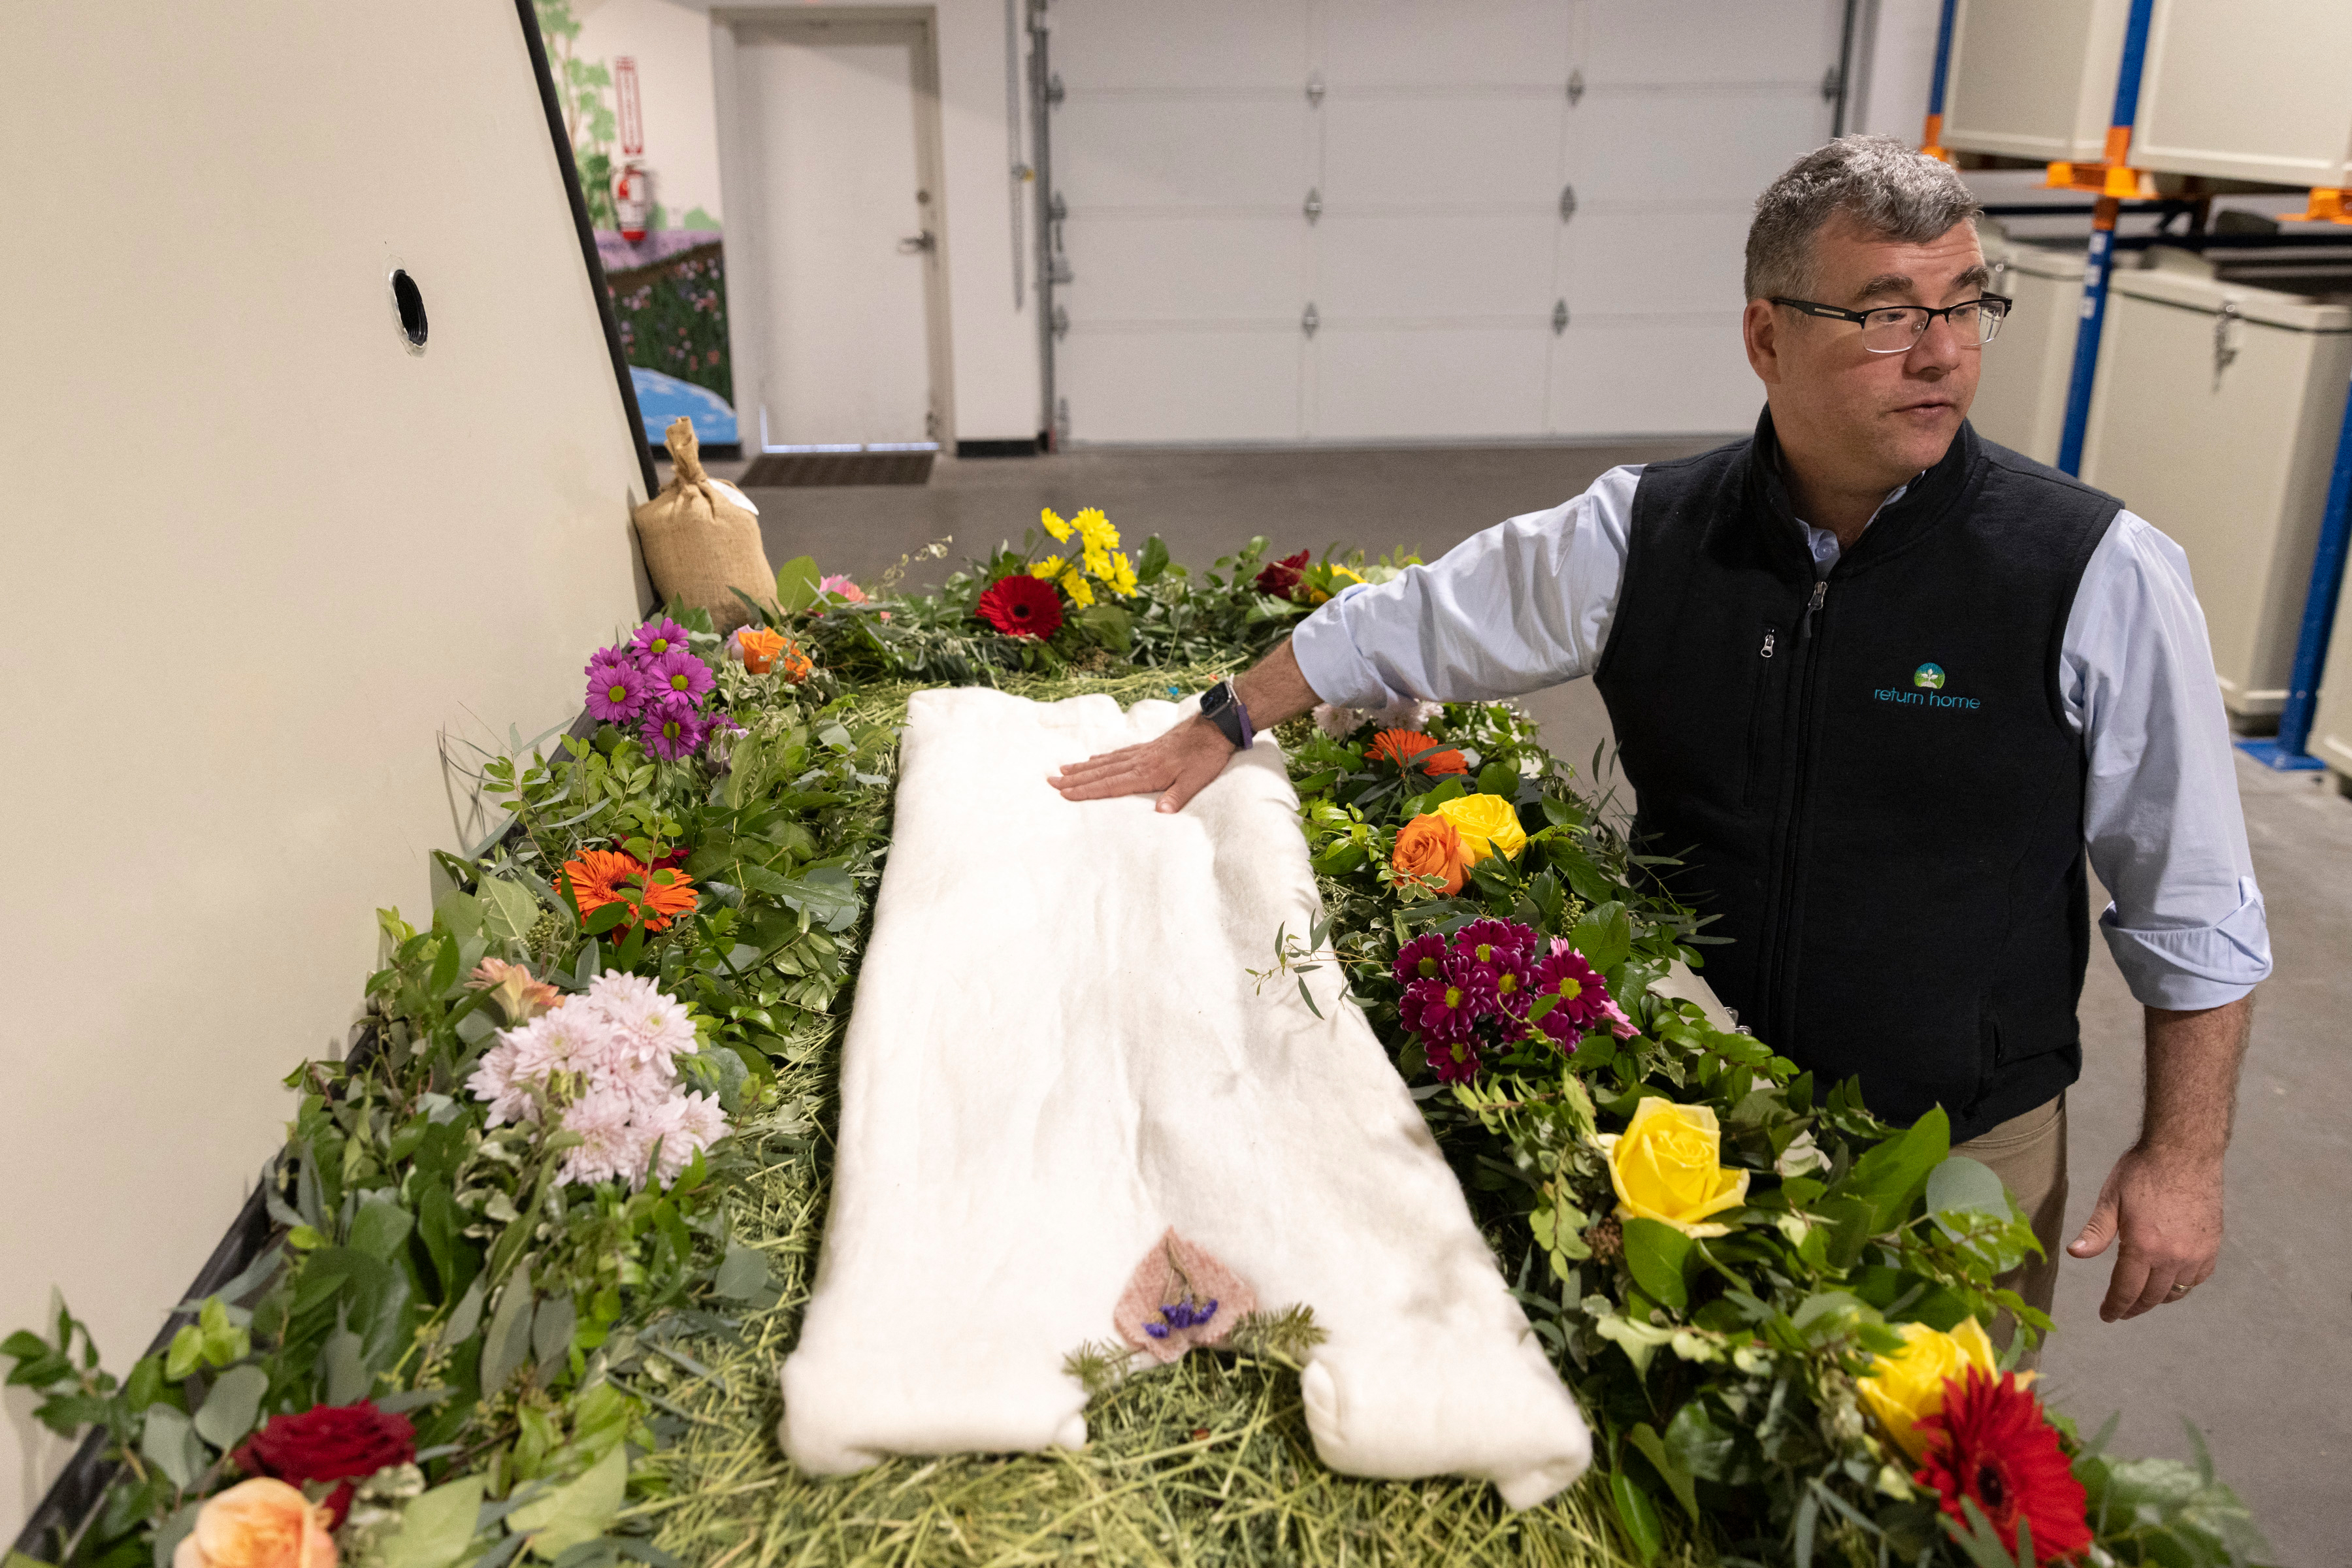 A photo shows Micah Truman standing next to a vessel decorated with flowers and compostable mementos on top of a bed of straw.